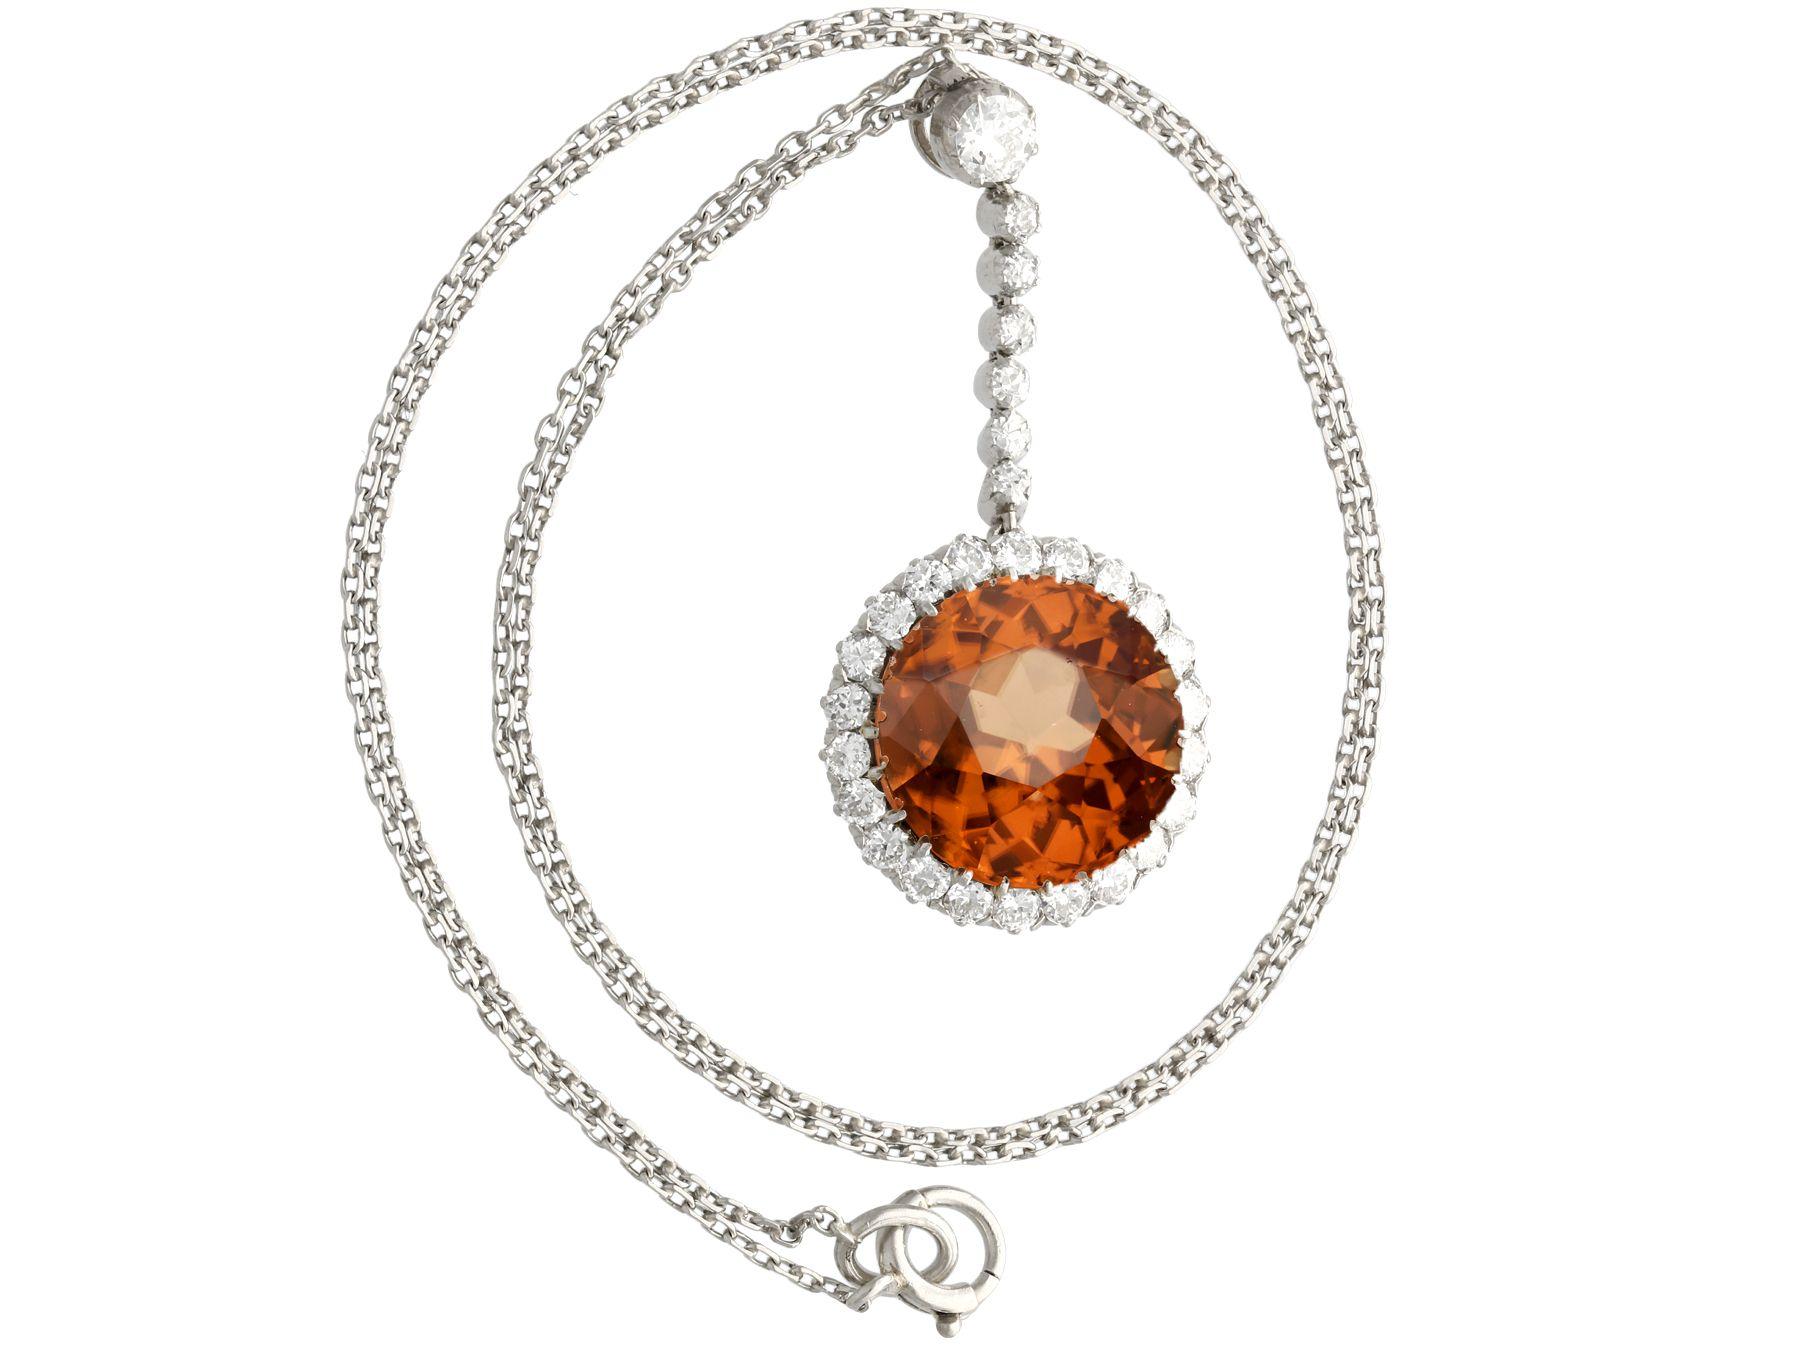 A stunning, fine and impressive antique 12.69 carat zircon and 1.04 carat diamond, palladium necklace with a platinum chain; part of our diverse antique jewelry and estate jewelry collections.

This stunning, fine and impressive antique pendant has